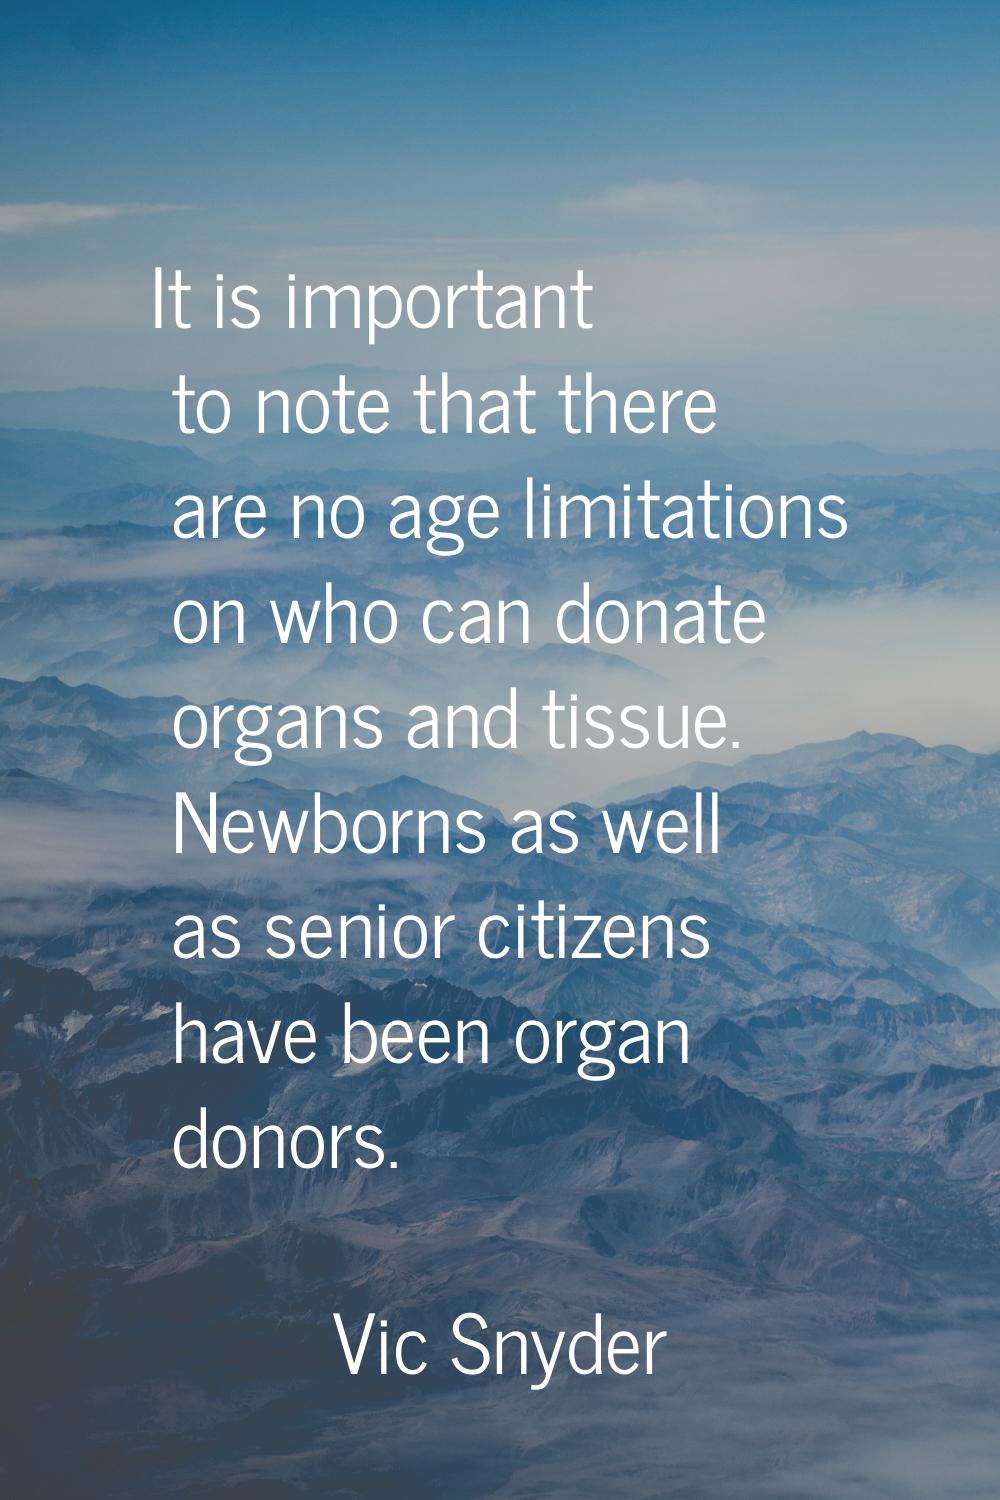 It is important to note that there are no age limitations on who can donate organs and tissue. Newb